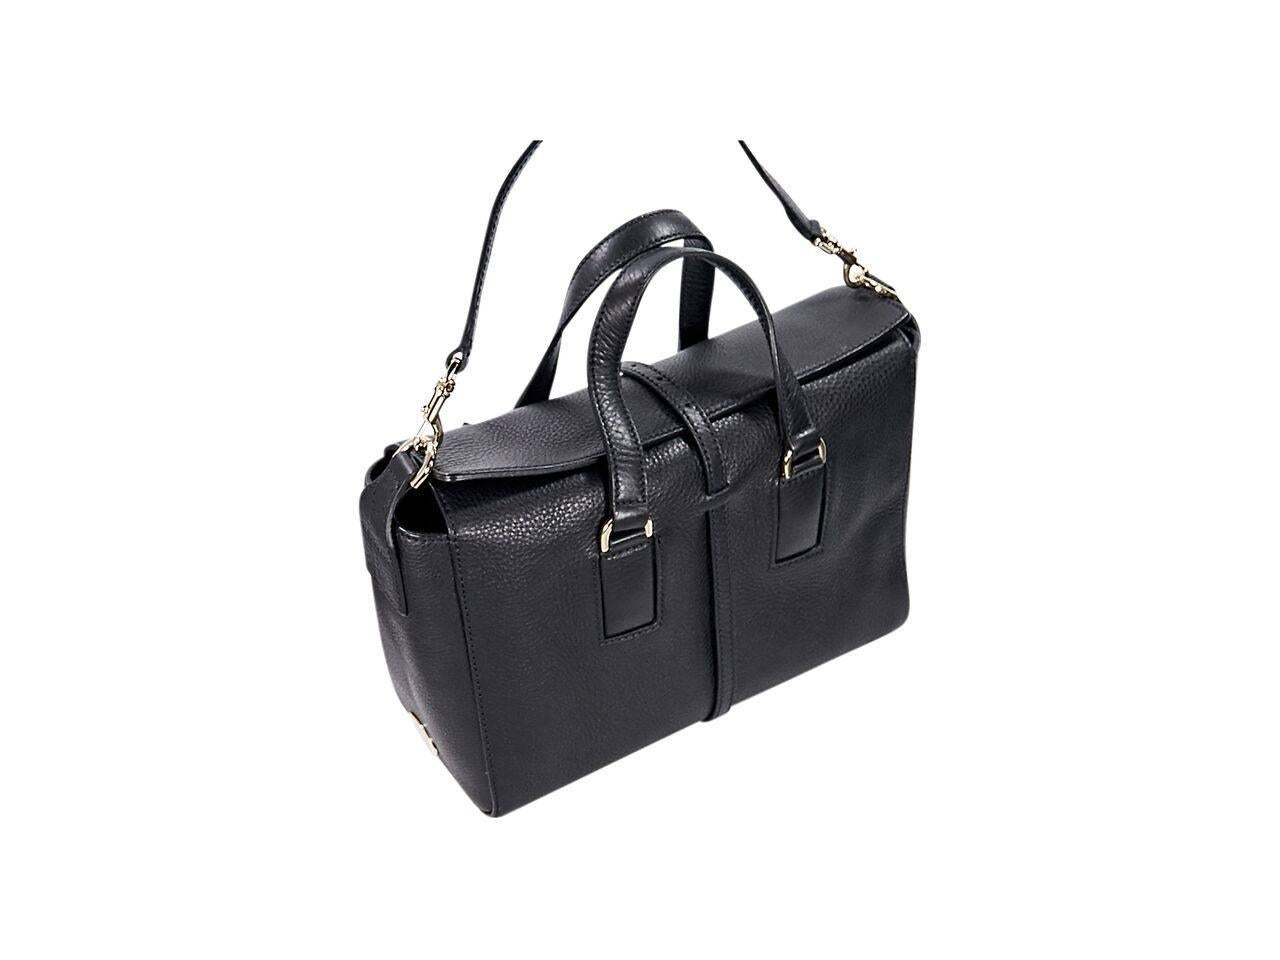 Product details:  Black small Roxette leather satchel by Mulberry.  Top carry handles.  Detachable, adjustable crossbody strap.  Adjustable buckle strap closure.  Lined interior with inner zip pocket.  Goldtone hardware.  12